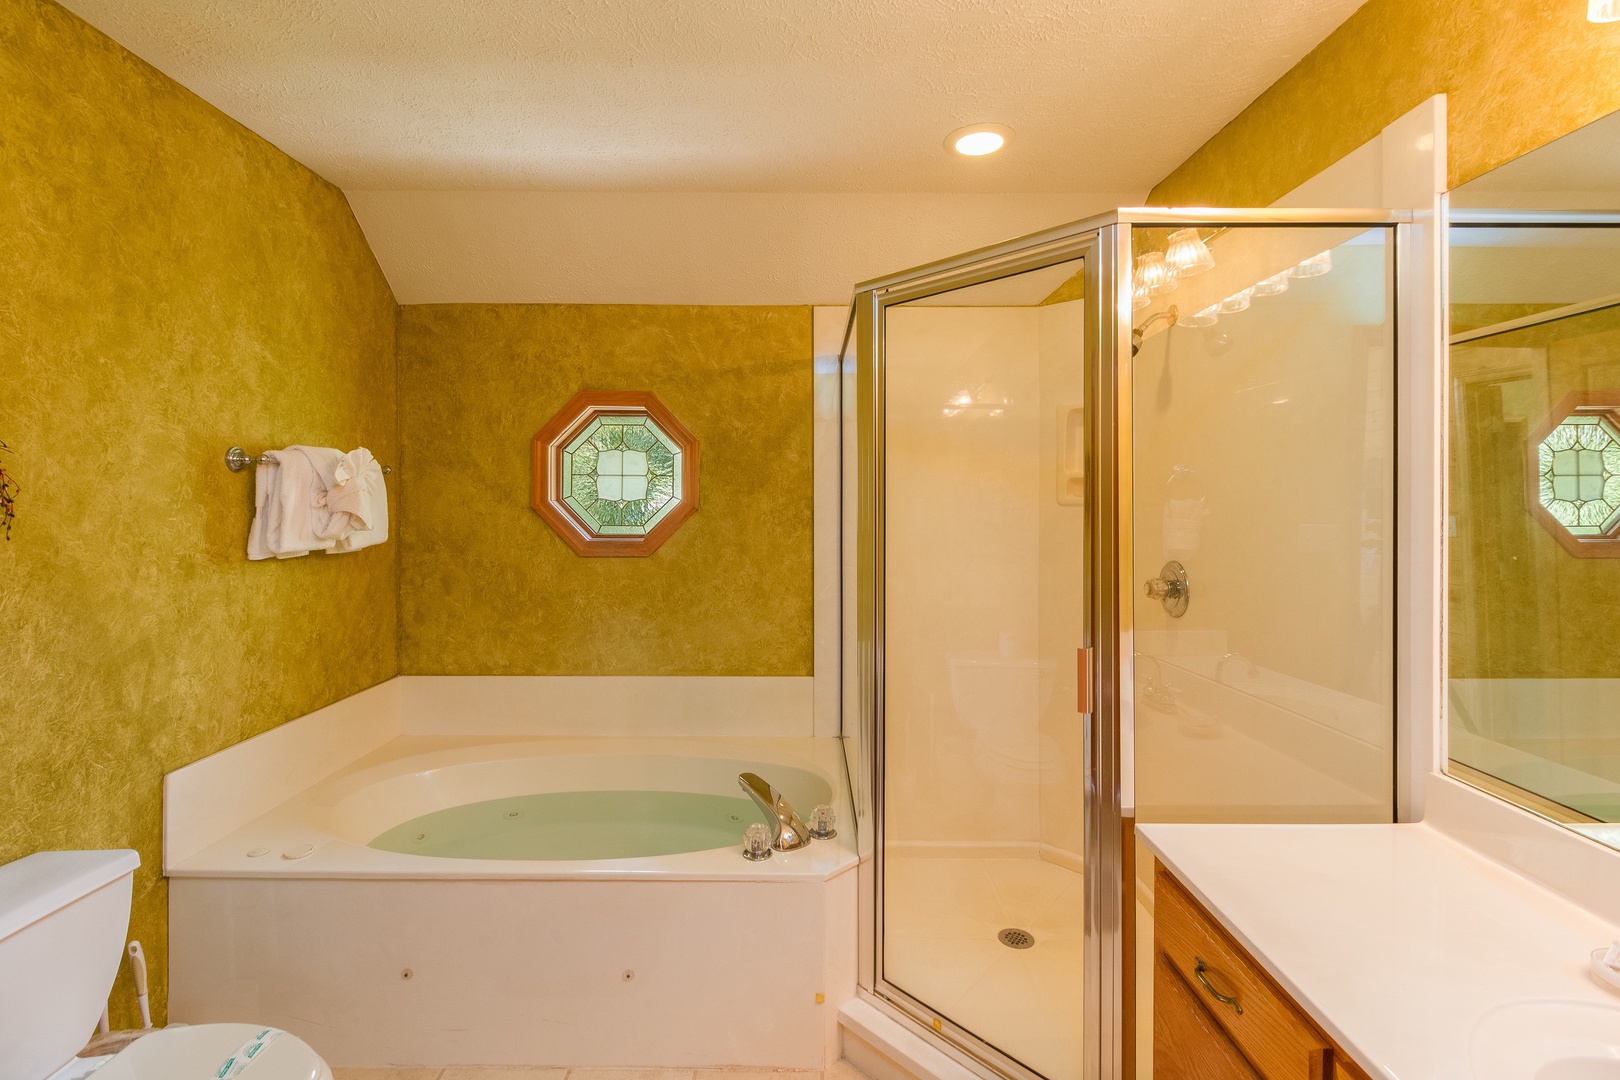 Bathroom with a jacuzzi and separate shower at Stones Throw, a 4 bedroom cabin rental located in Pigeon Forge